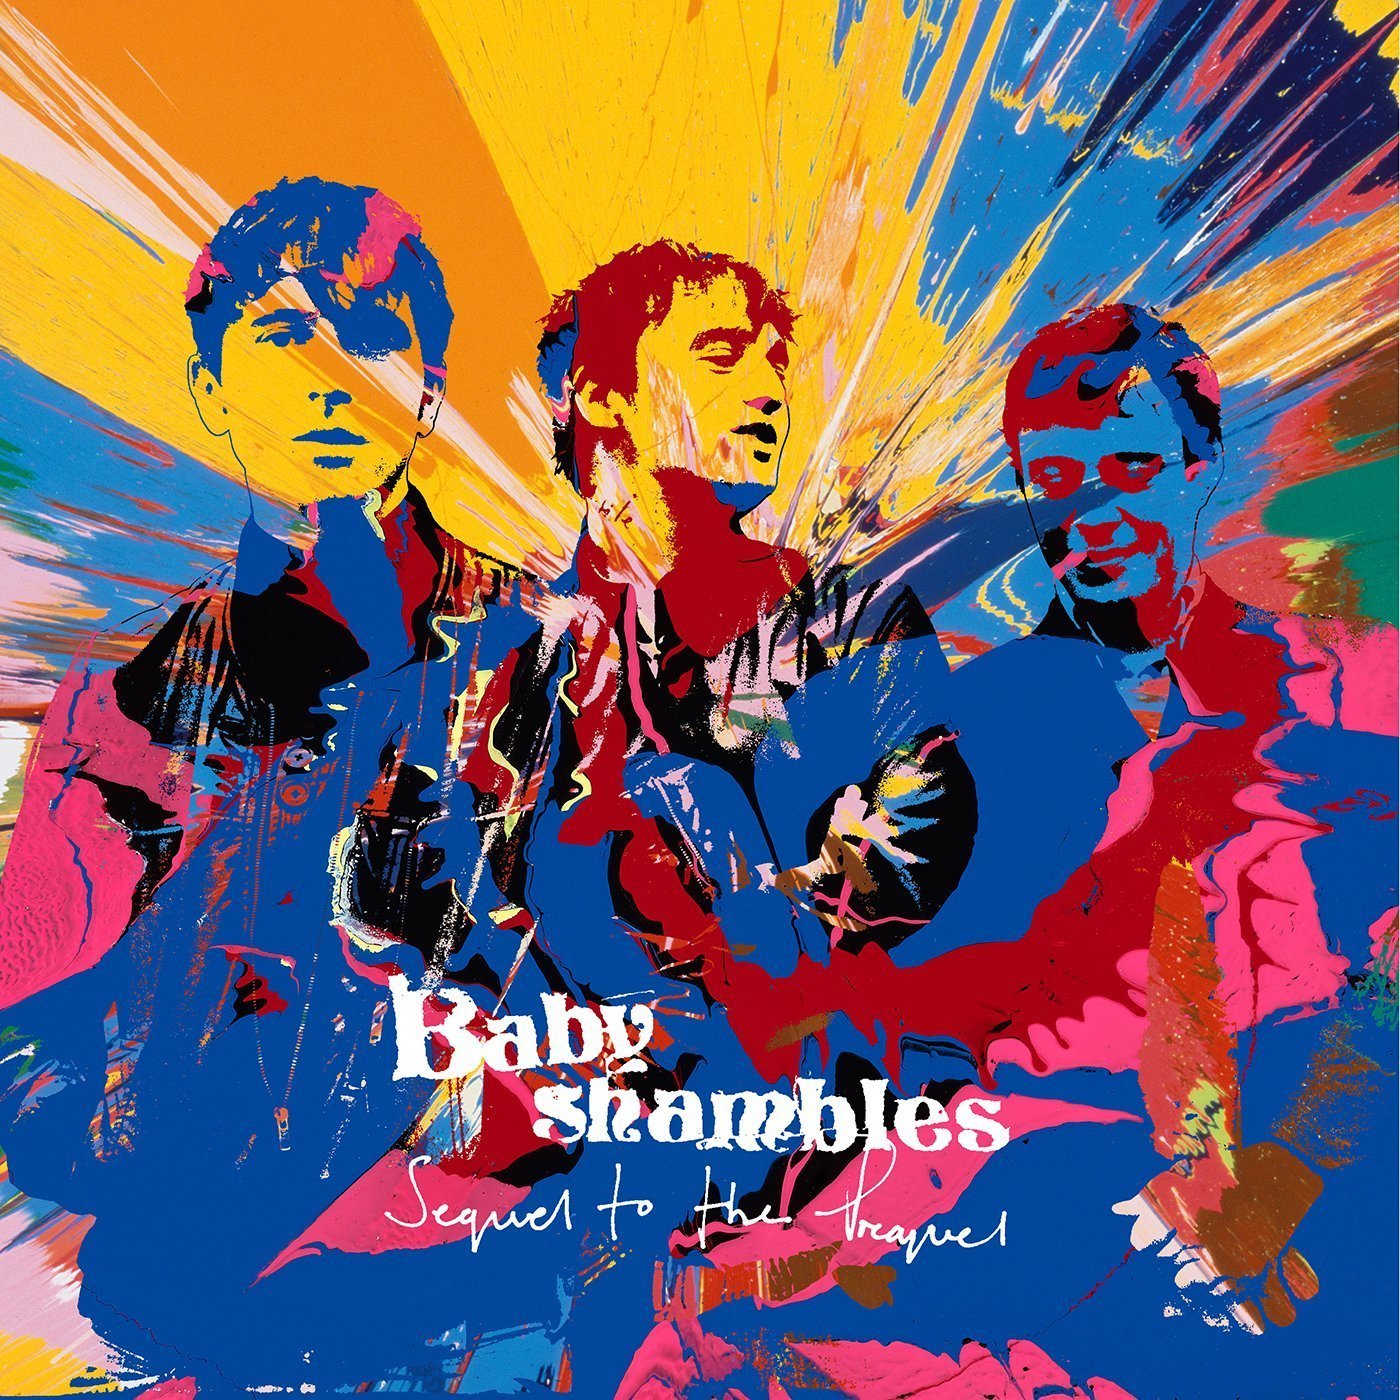 boom music reviews - Sequel to the Prequel by Babyshambles